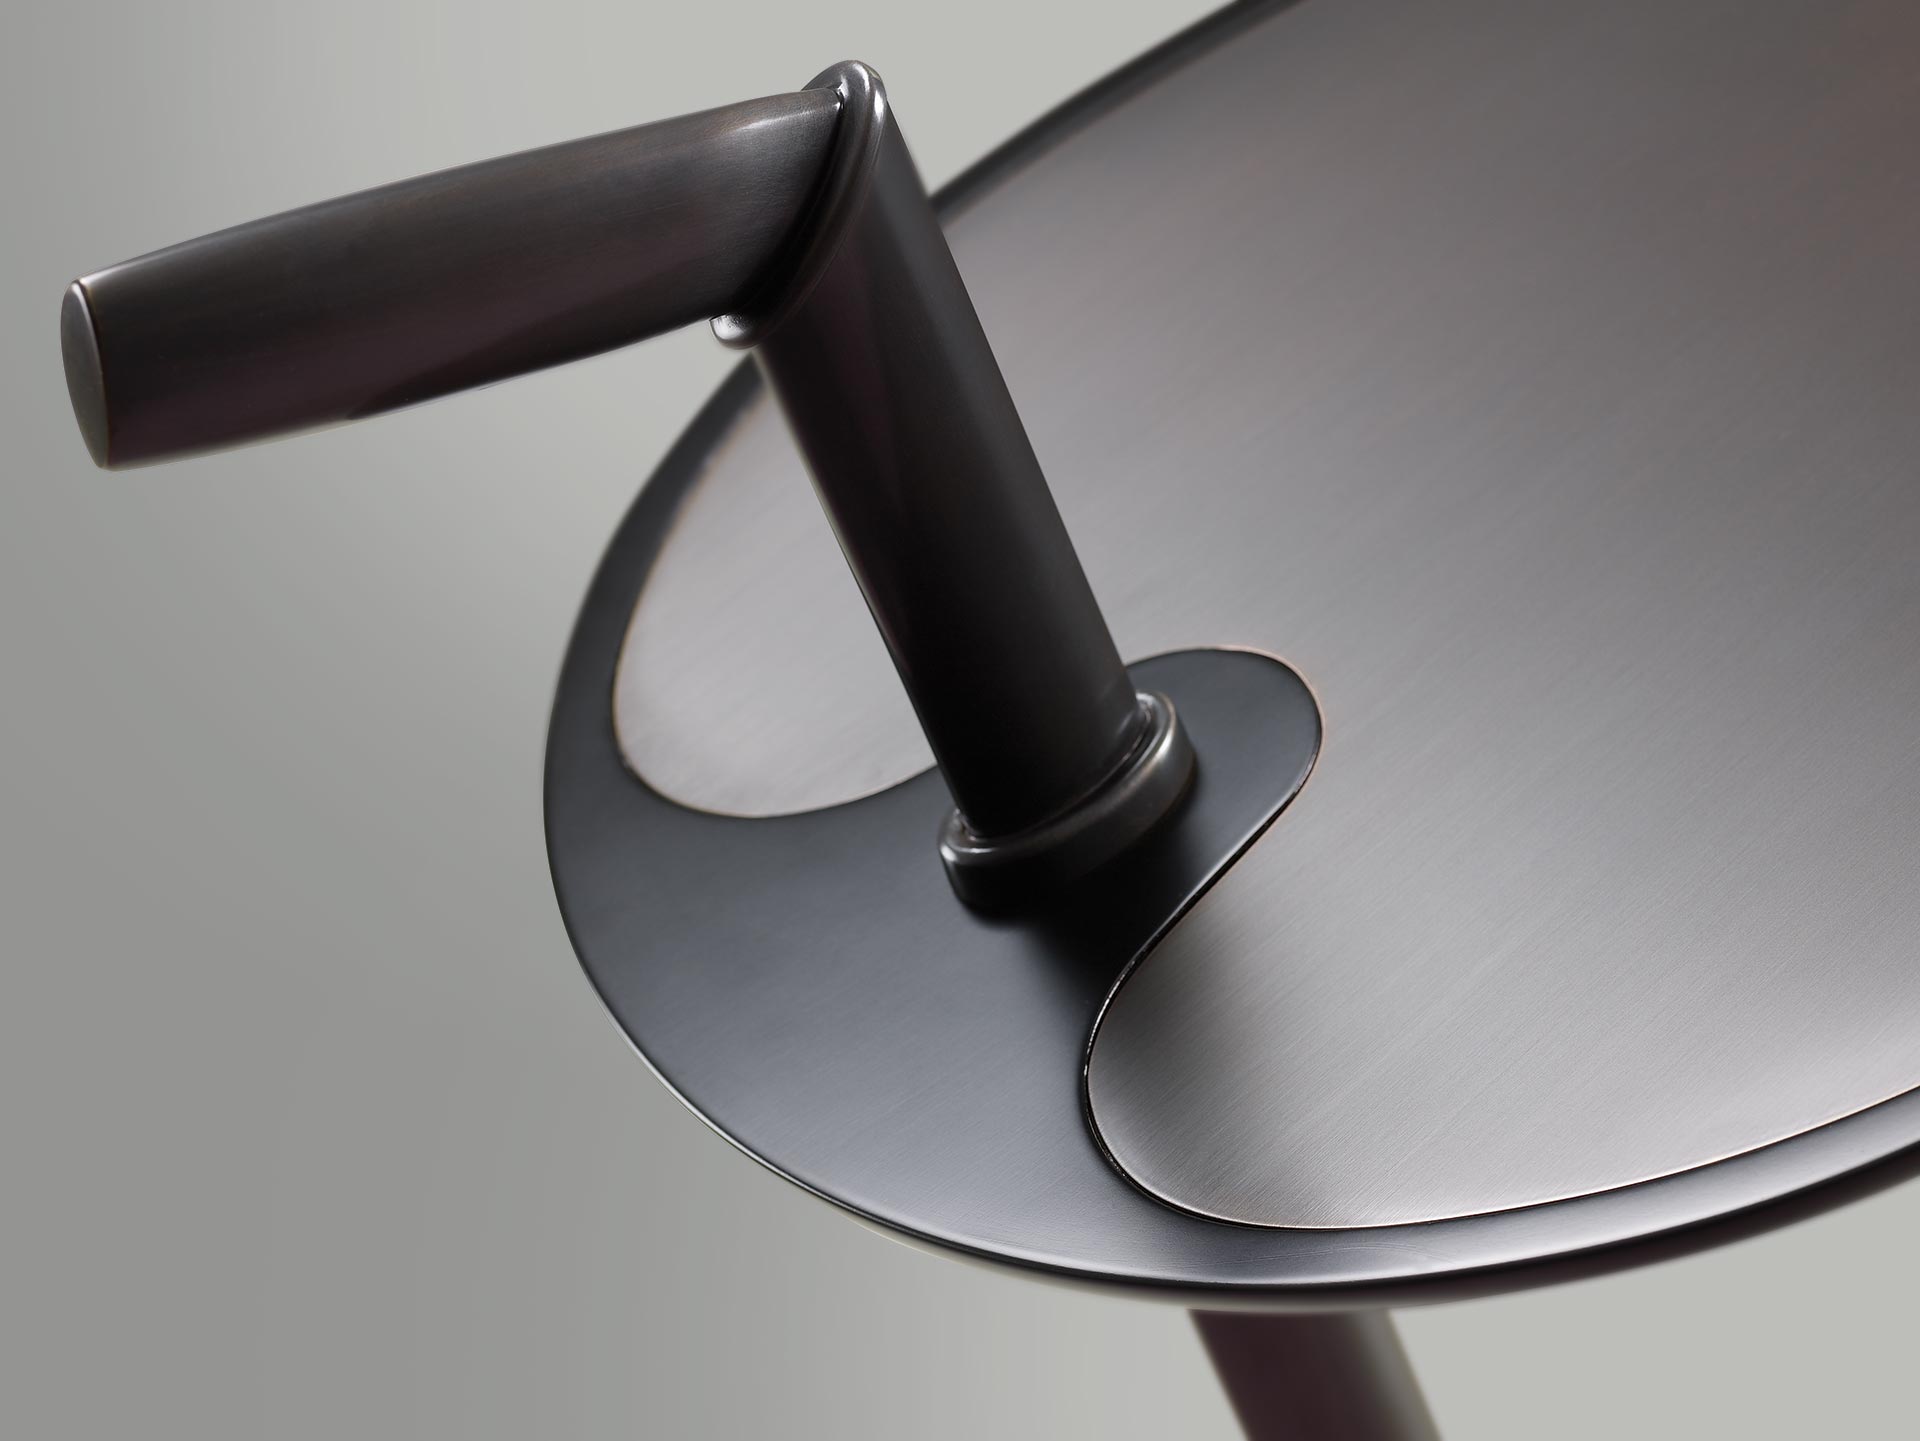 Bip Bip is a bronze small table with bronze, leather or galuchat, from Promemoria's catalogue | Promemoria